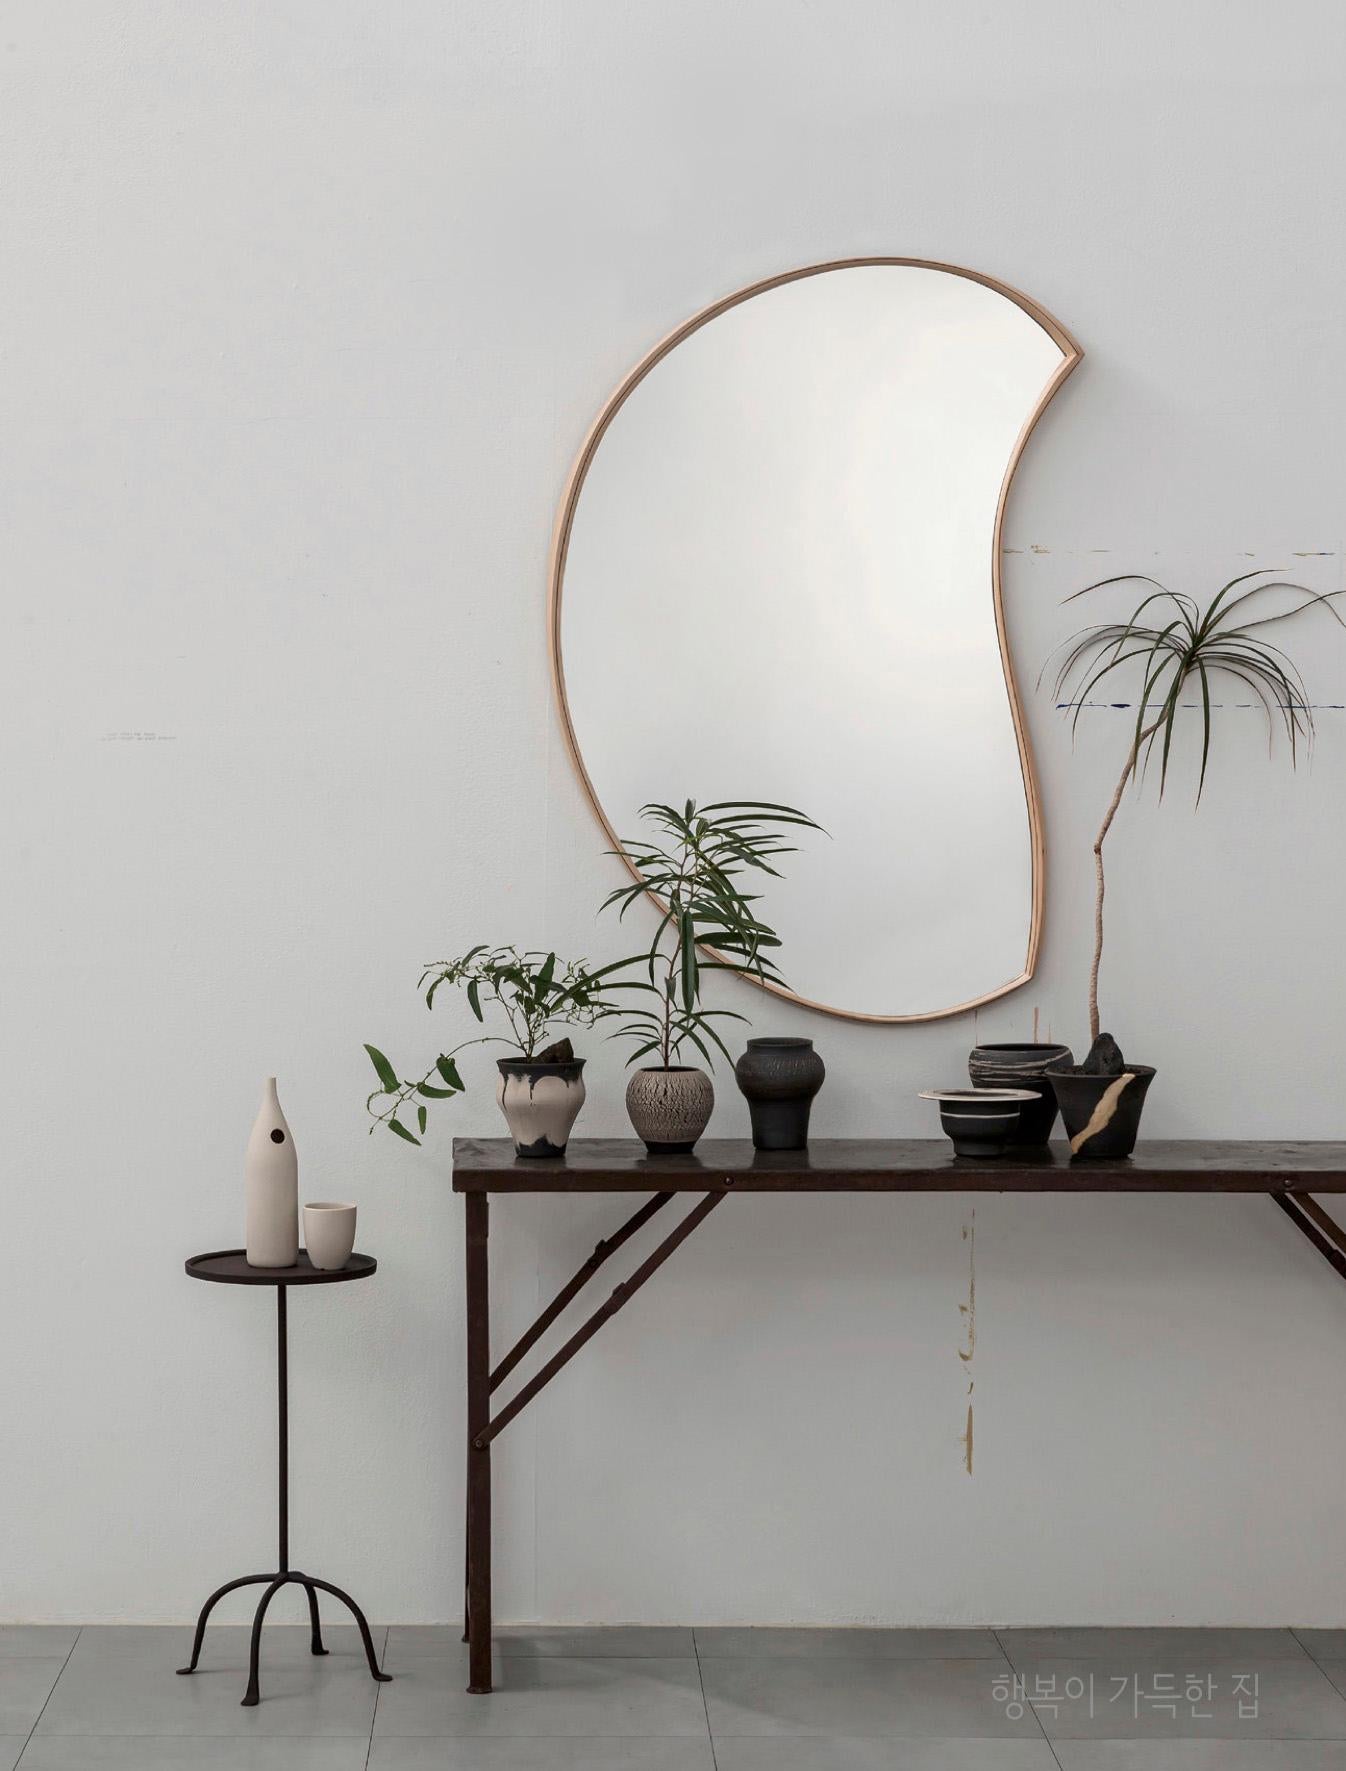 'Moon Mirror' by Soo Joo is an asymmetric and organic wall mirror. It has a timeless beauty that can be enjoyed for decades, and the sculptural work fits into any interior. Soo Joo's works use natural materials that have a long history with mankind,